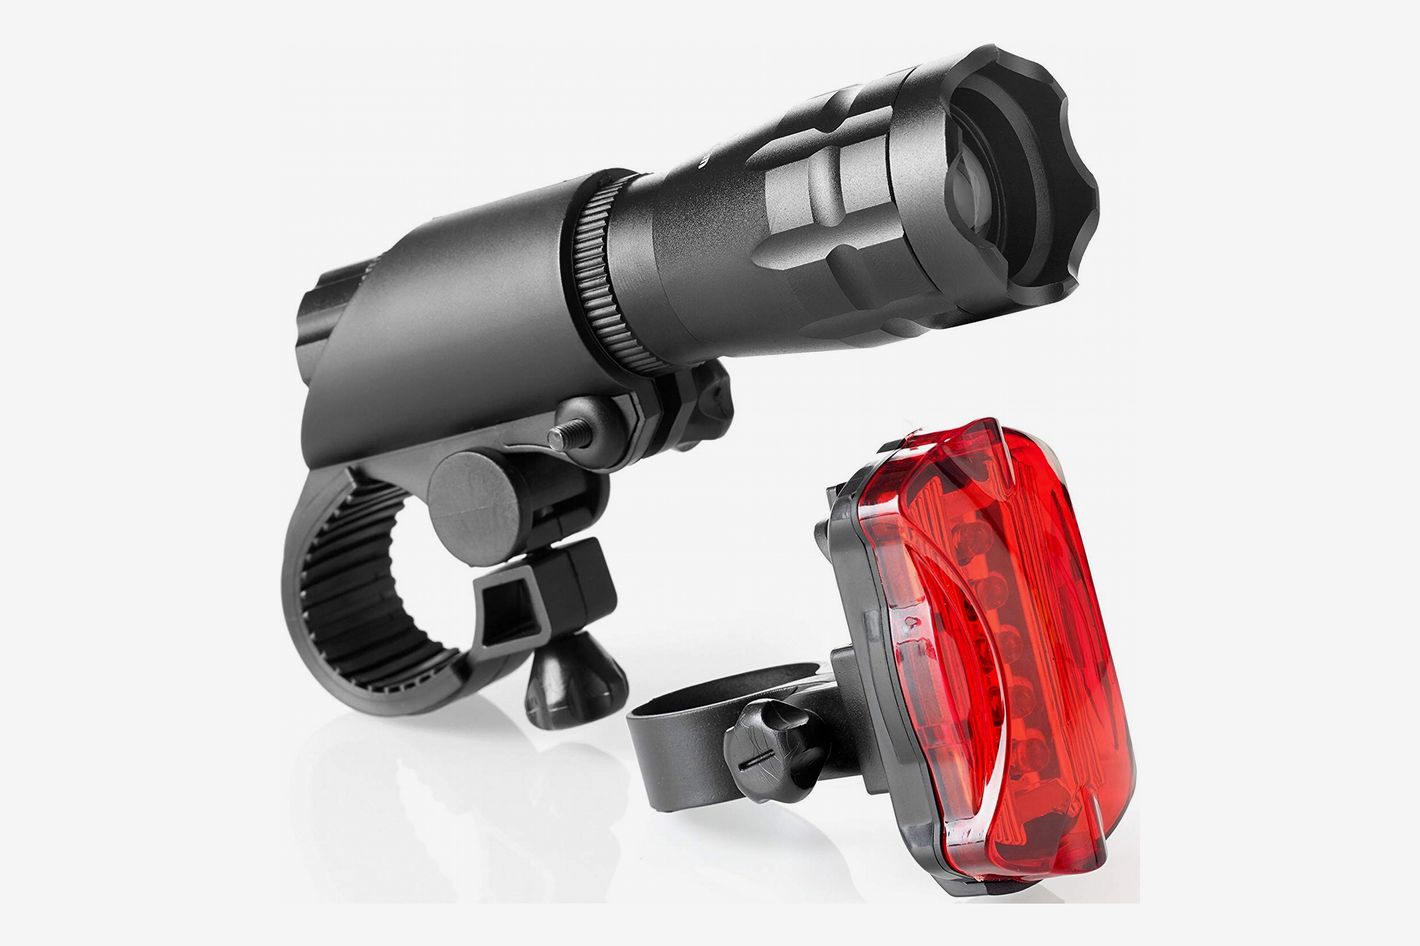 HEOMU Bike Light USB Rechargeable Bicycle Cycling Headlight Waterproof Bicycle Front Light Mountain Safty Bike Light 500 Lumen LED Flashlight with 3 Modes With Charging Function